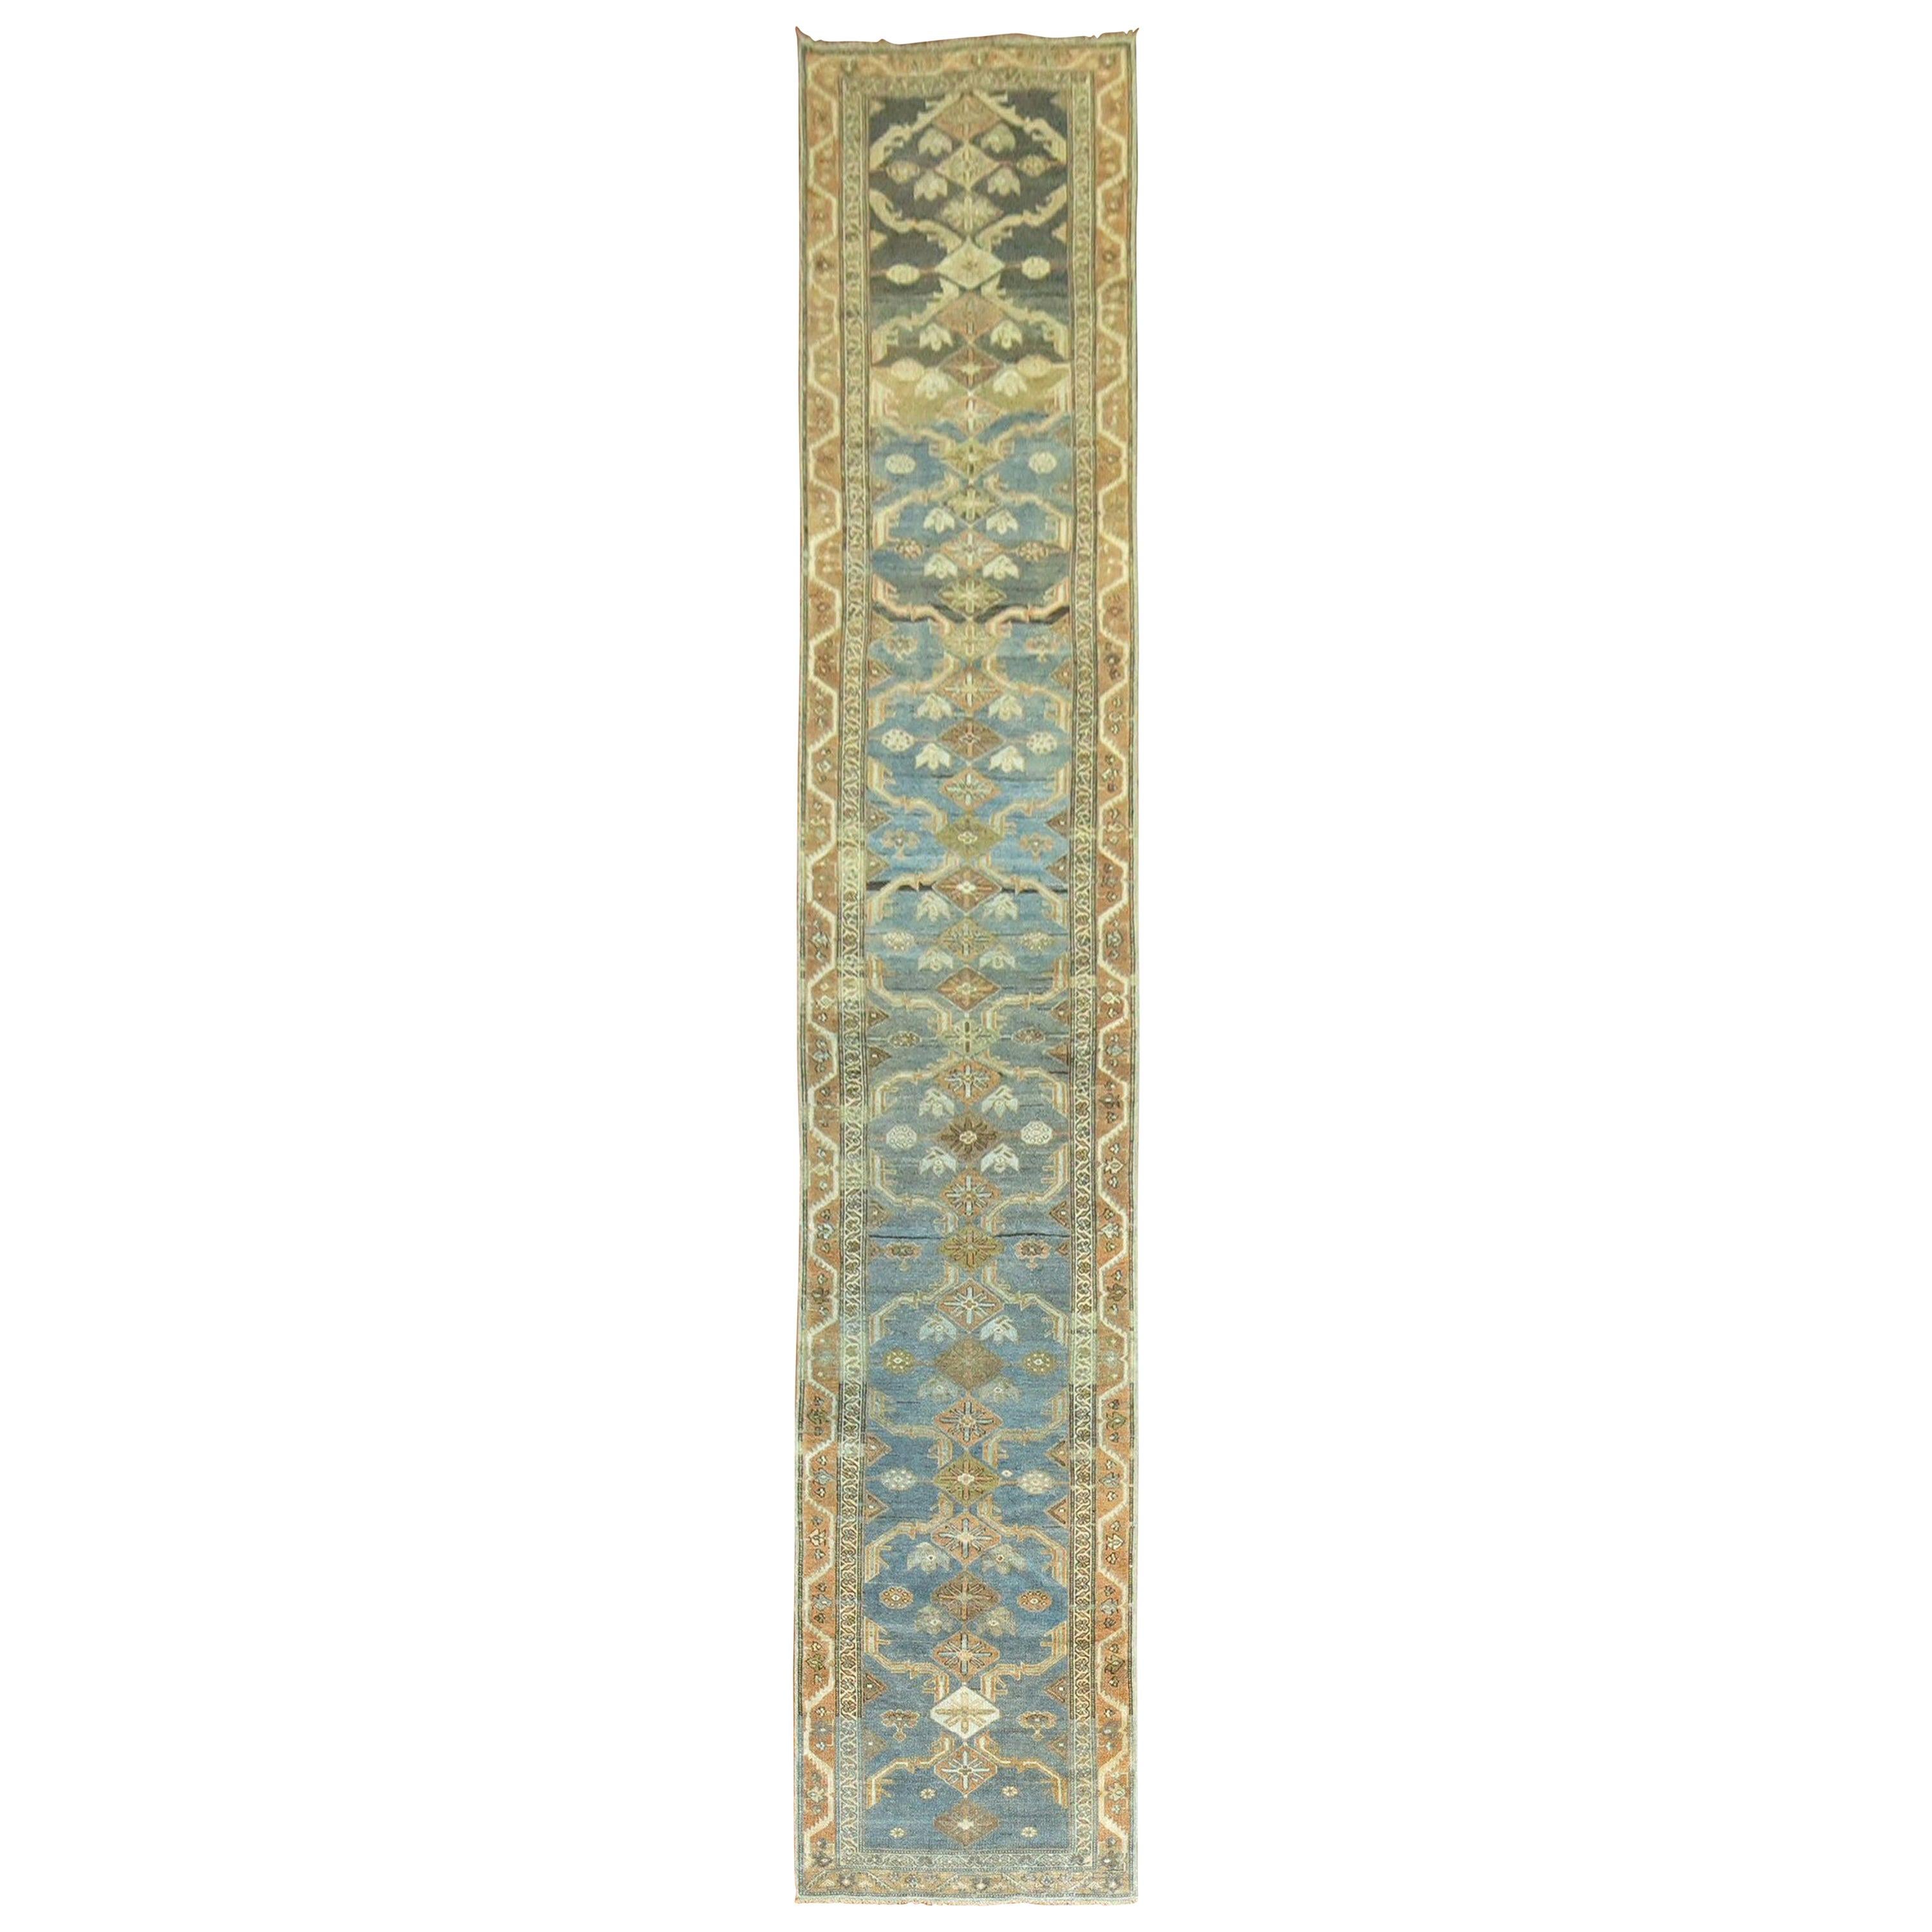 Early 20th Century Persian Malayer Long Runner in Denim Blue and Brown